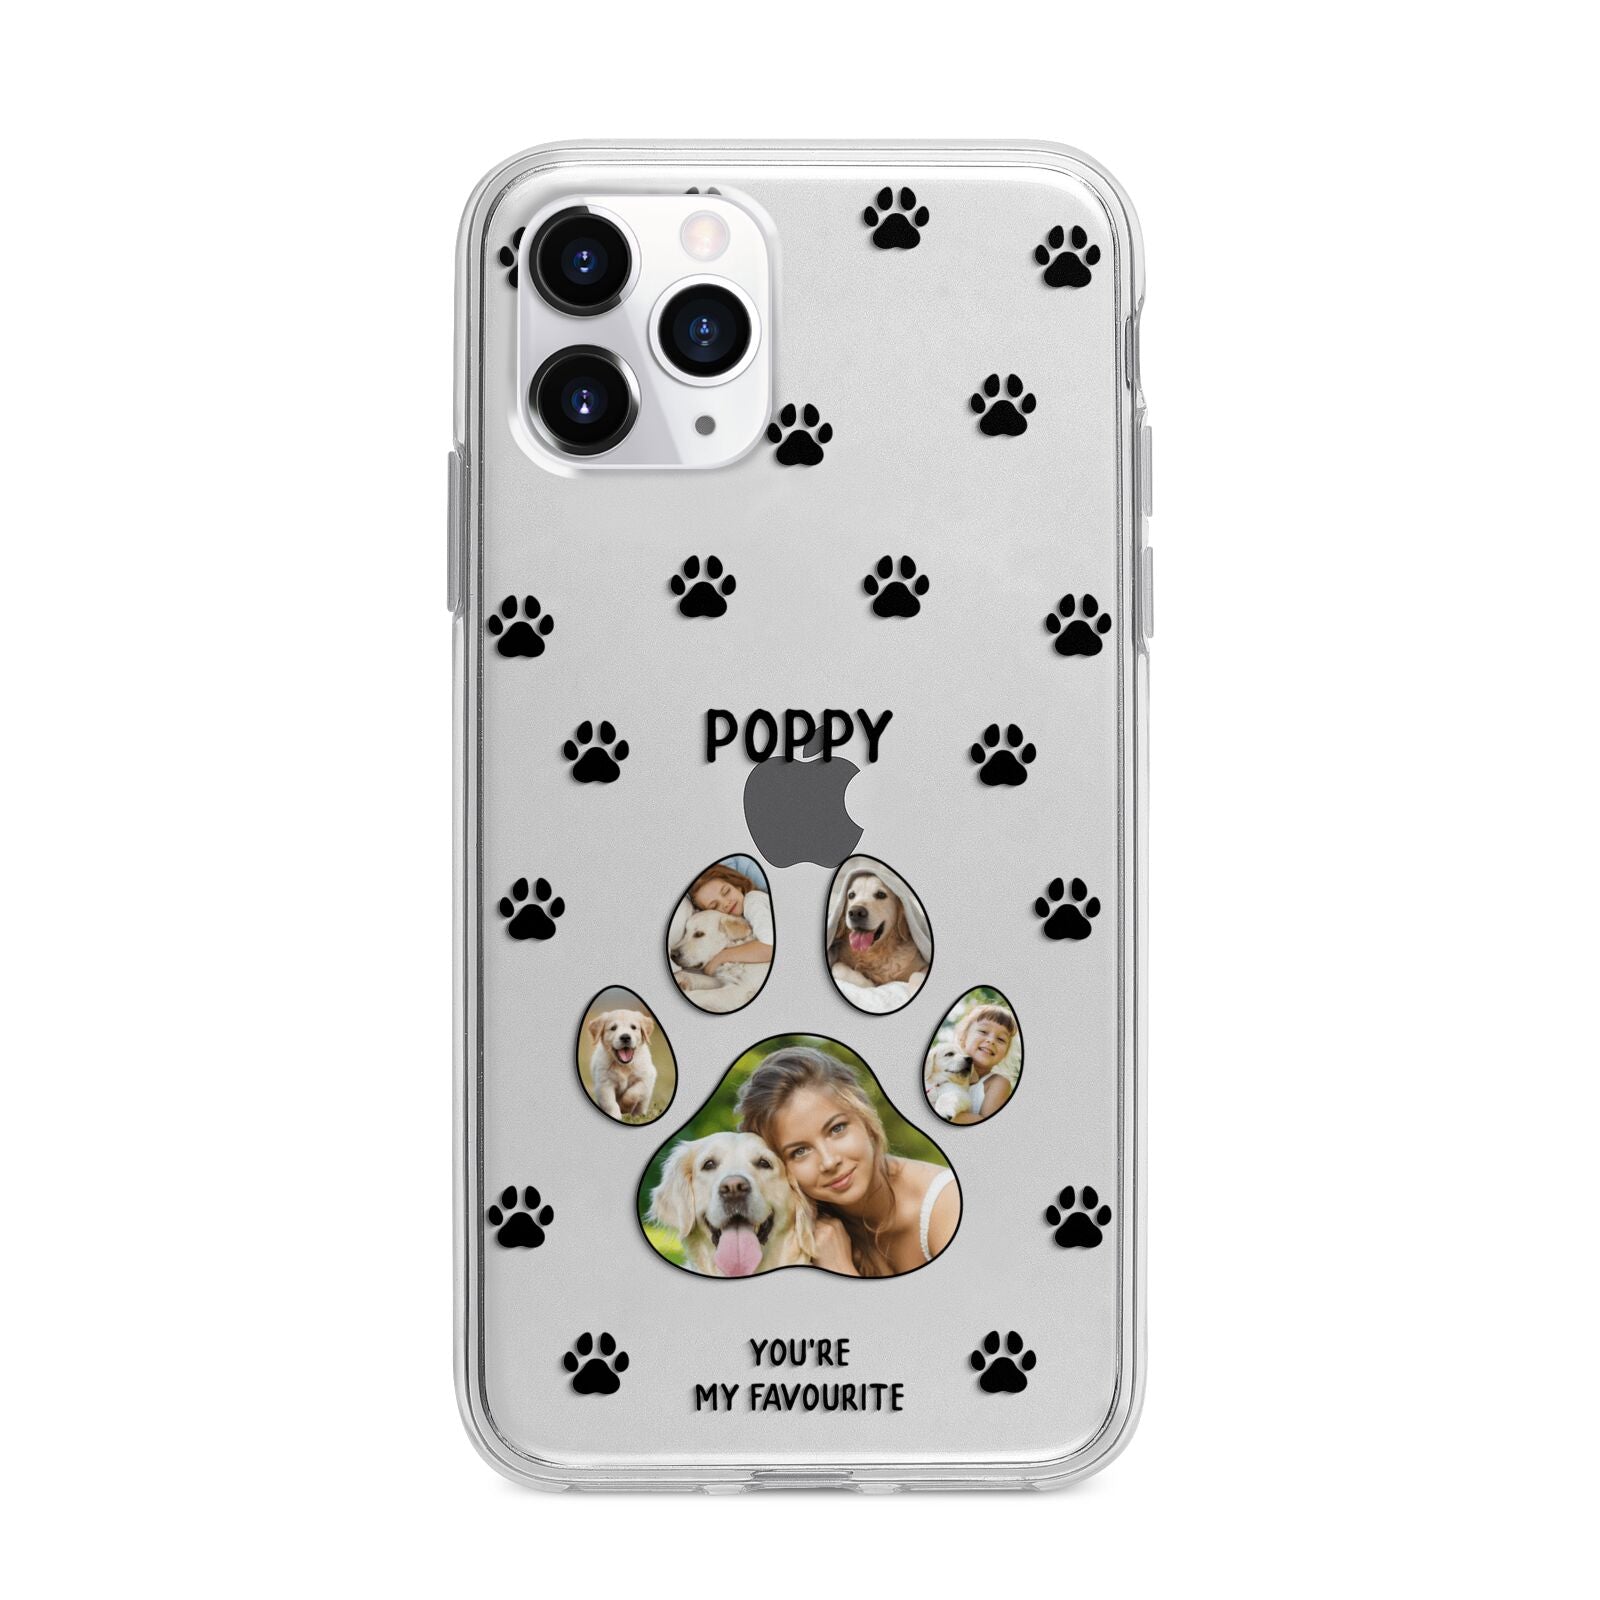 Favourite Dog Photos Personalised Apple iPhone 11 Pro Max in Silver with Bumper Case